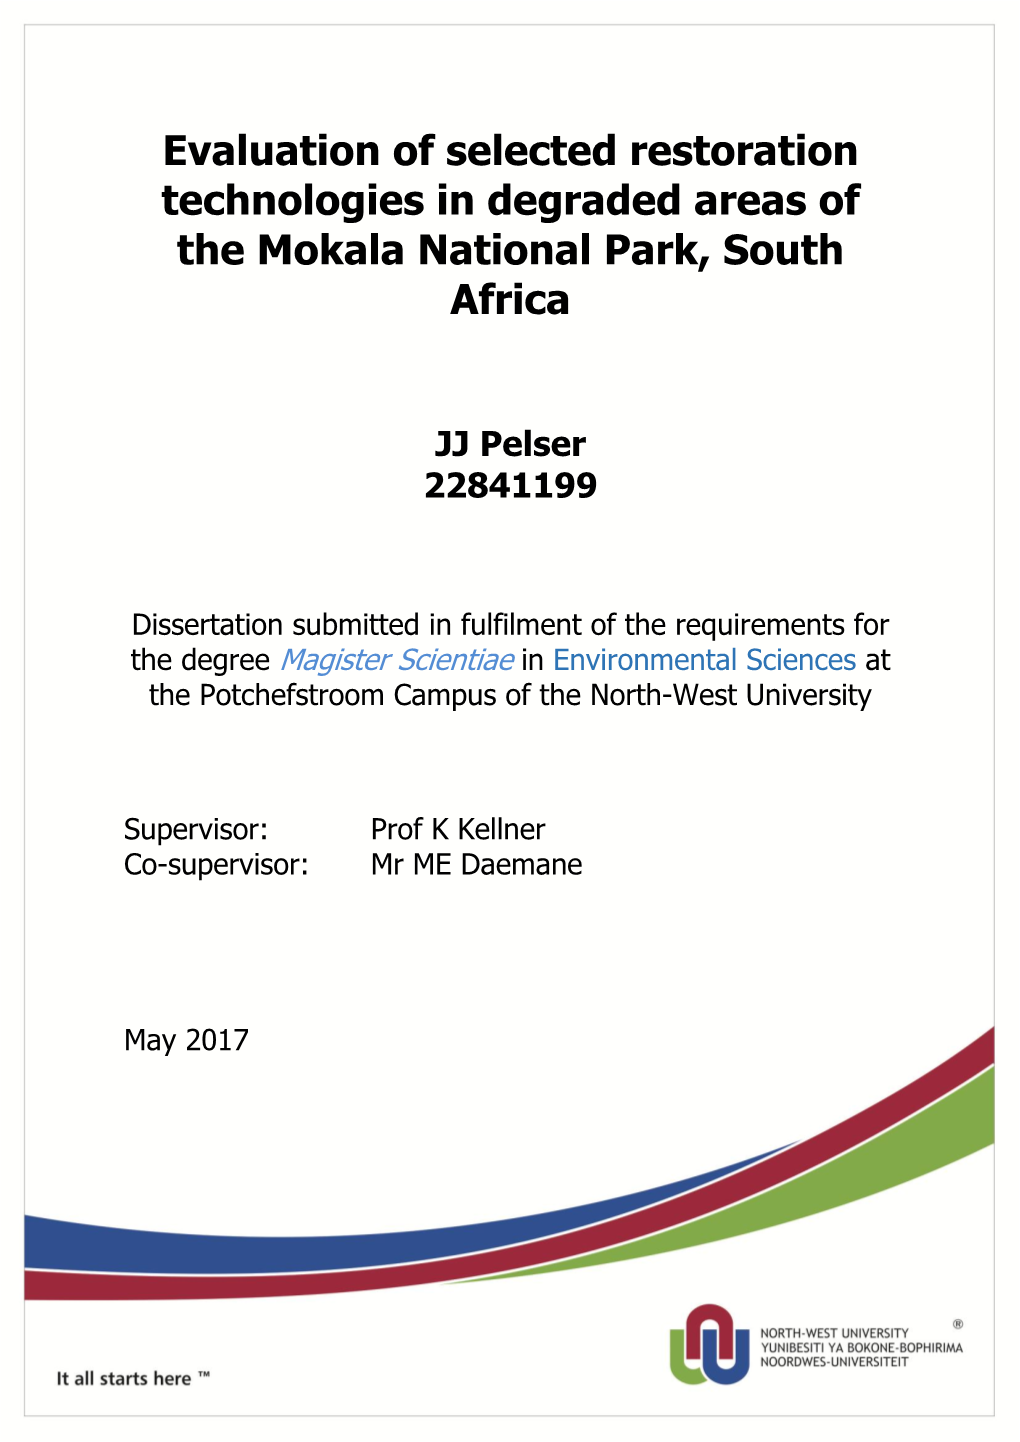 Evaluation of Selected Restoration Technologies in Degraded Areas of the Mokala National Park, South Africa